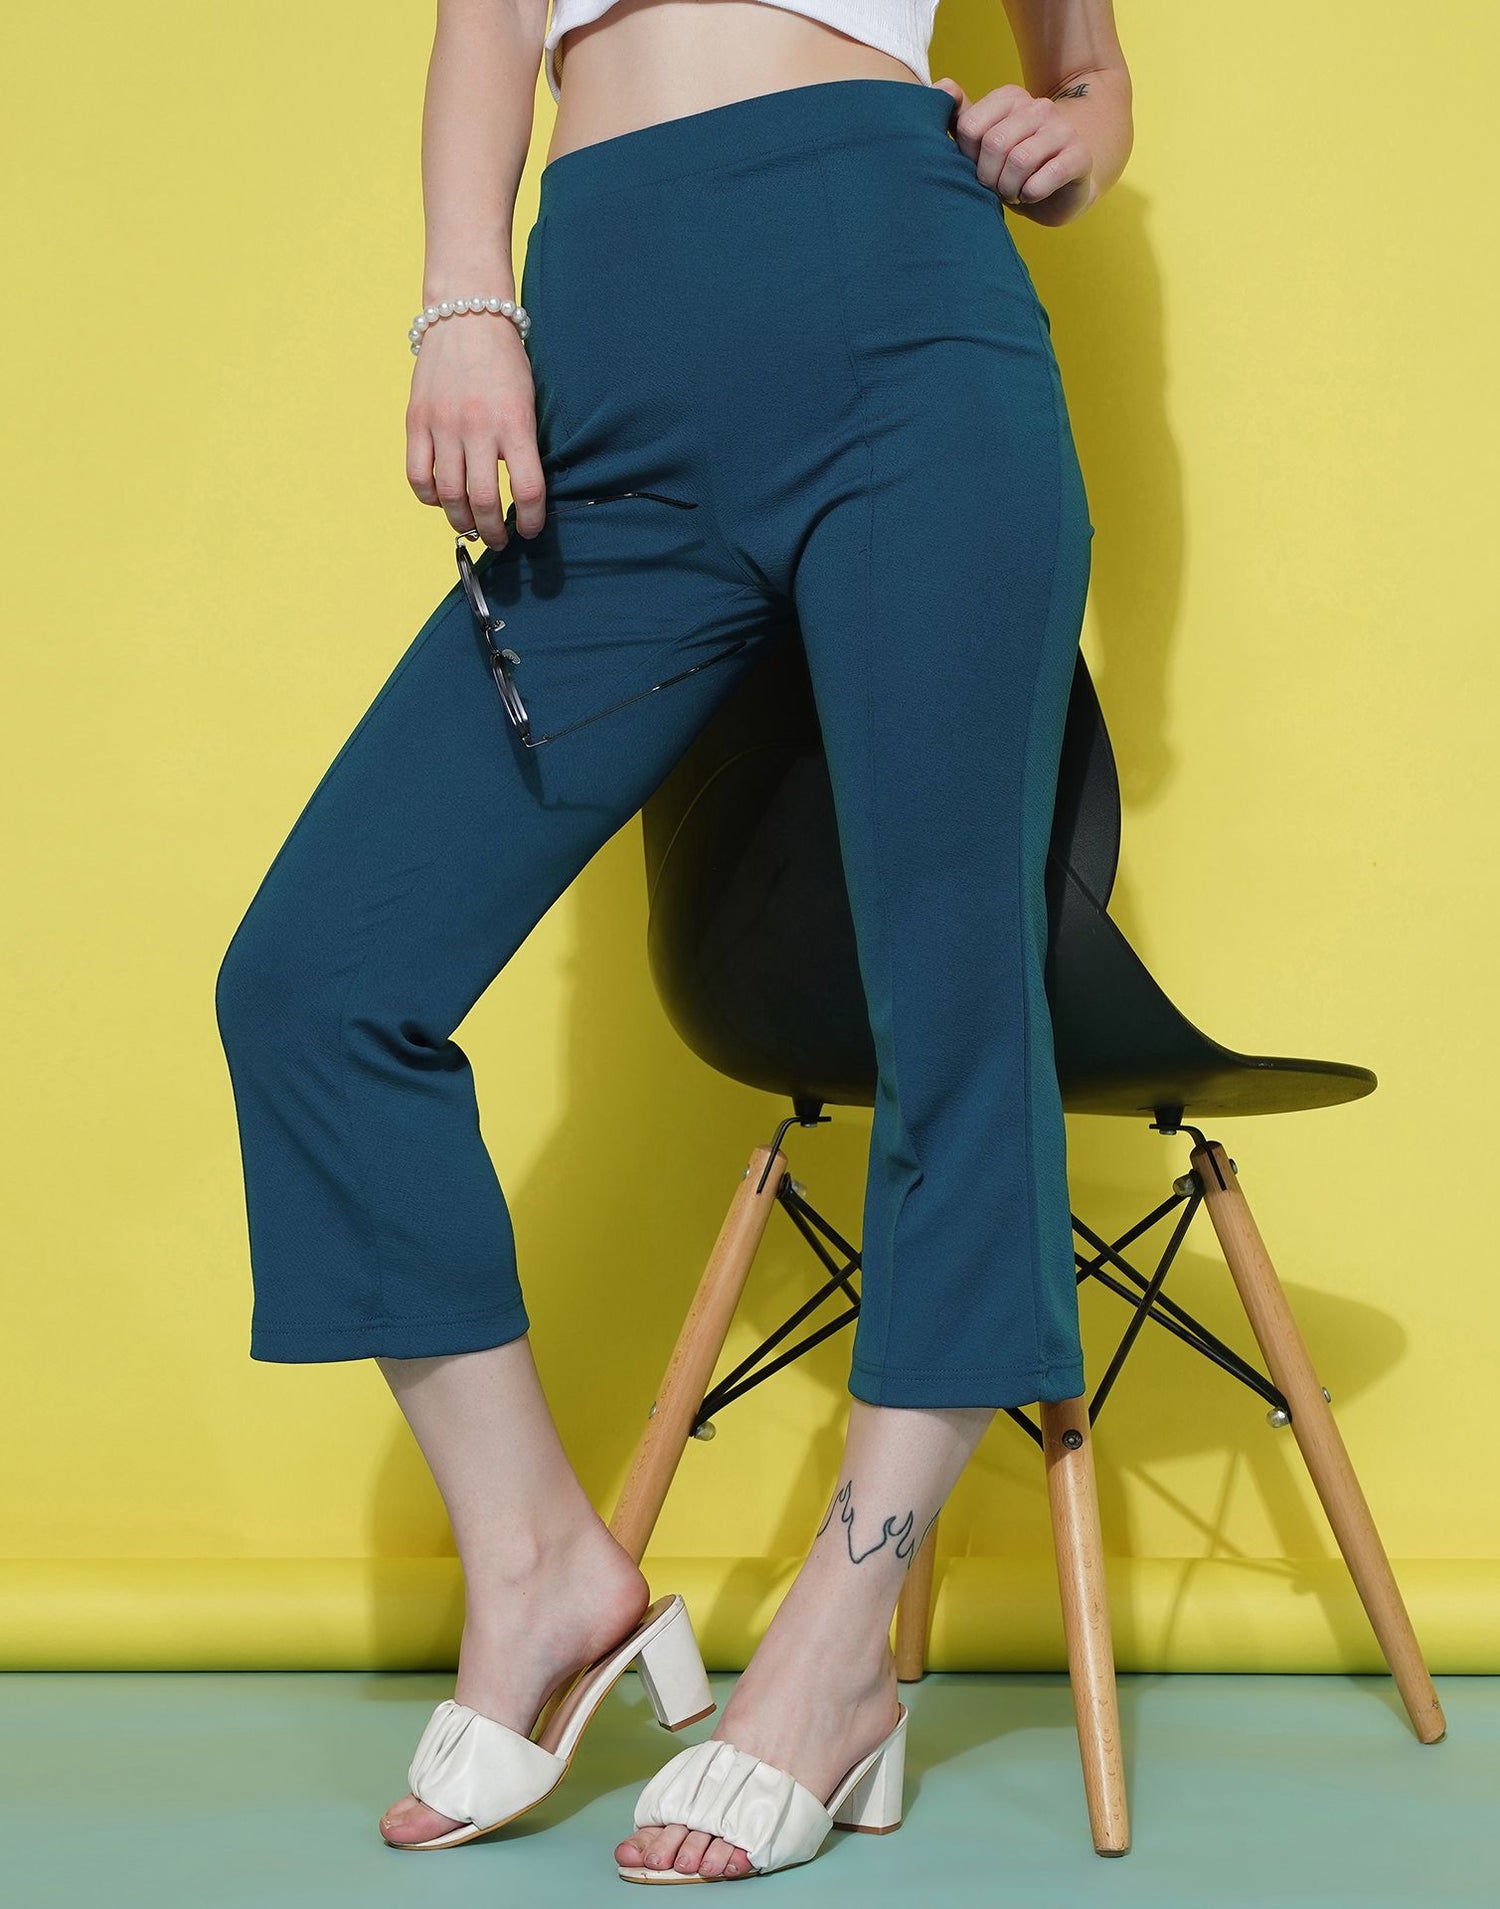 Buy Cyan Ankle Length Pant Cotton Samray for Best Price, Reviews, Free  Shipping